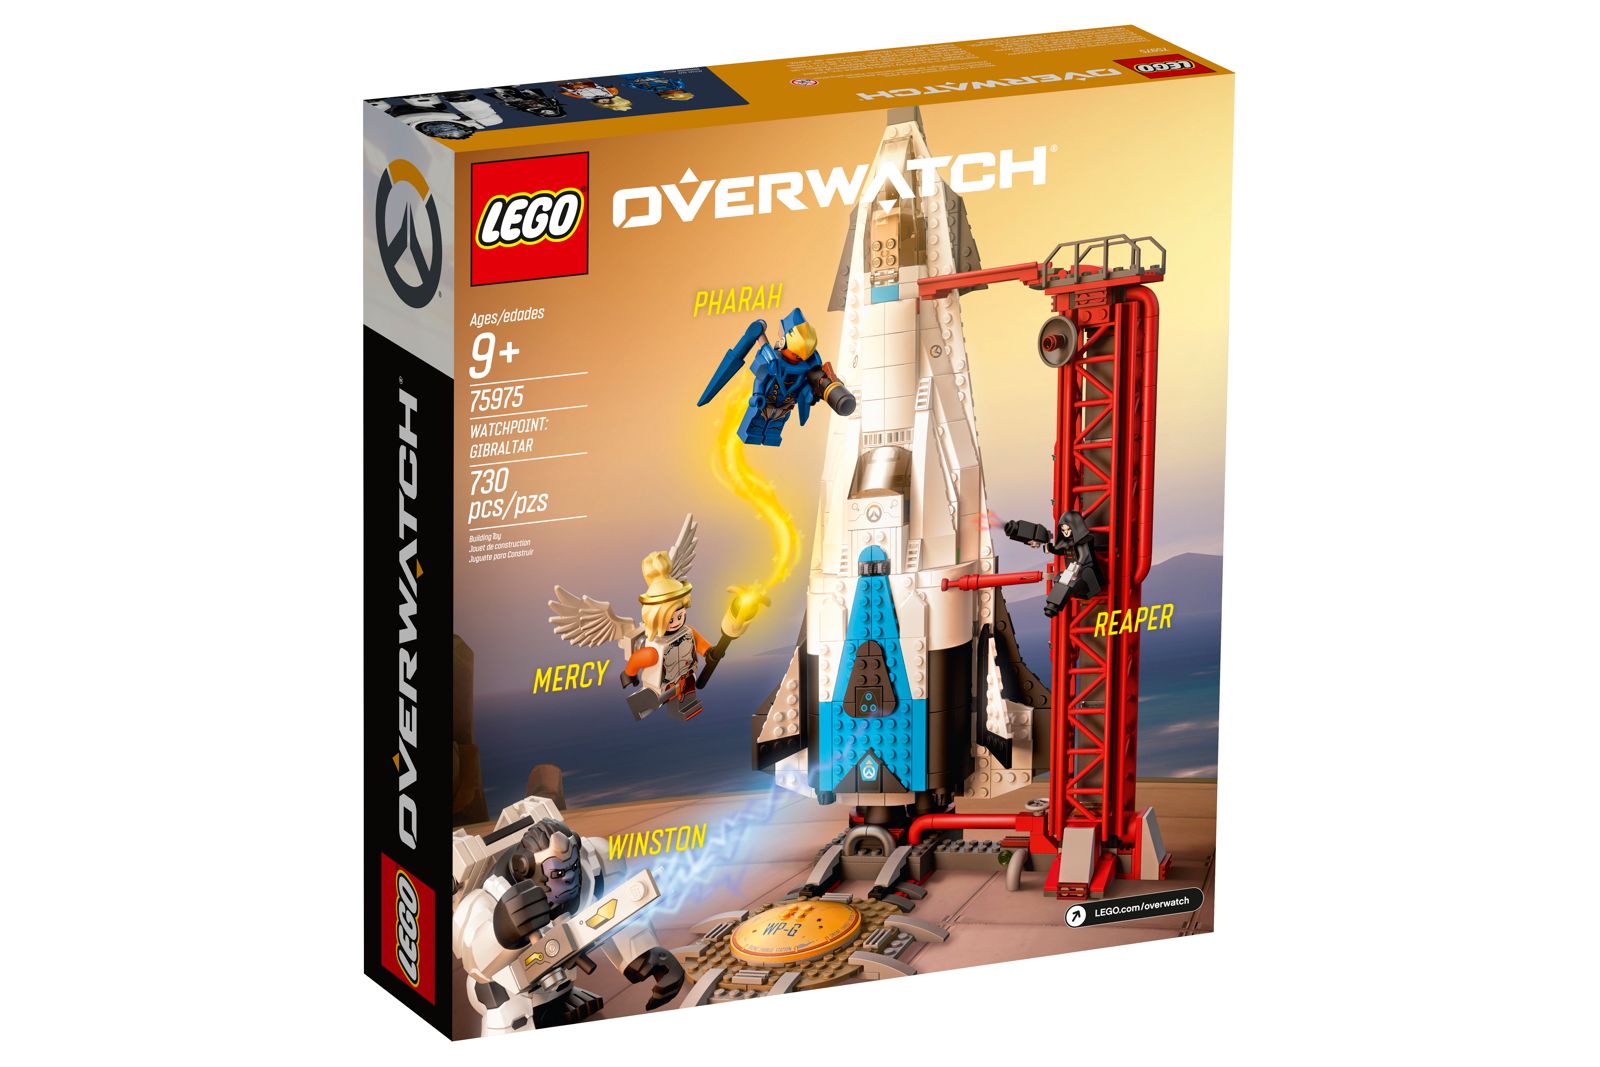 Lego reveals Overwatch sets and availability image 5